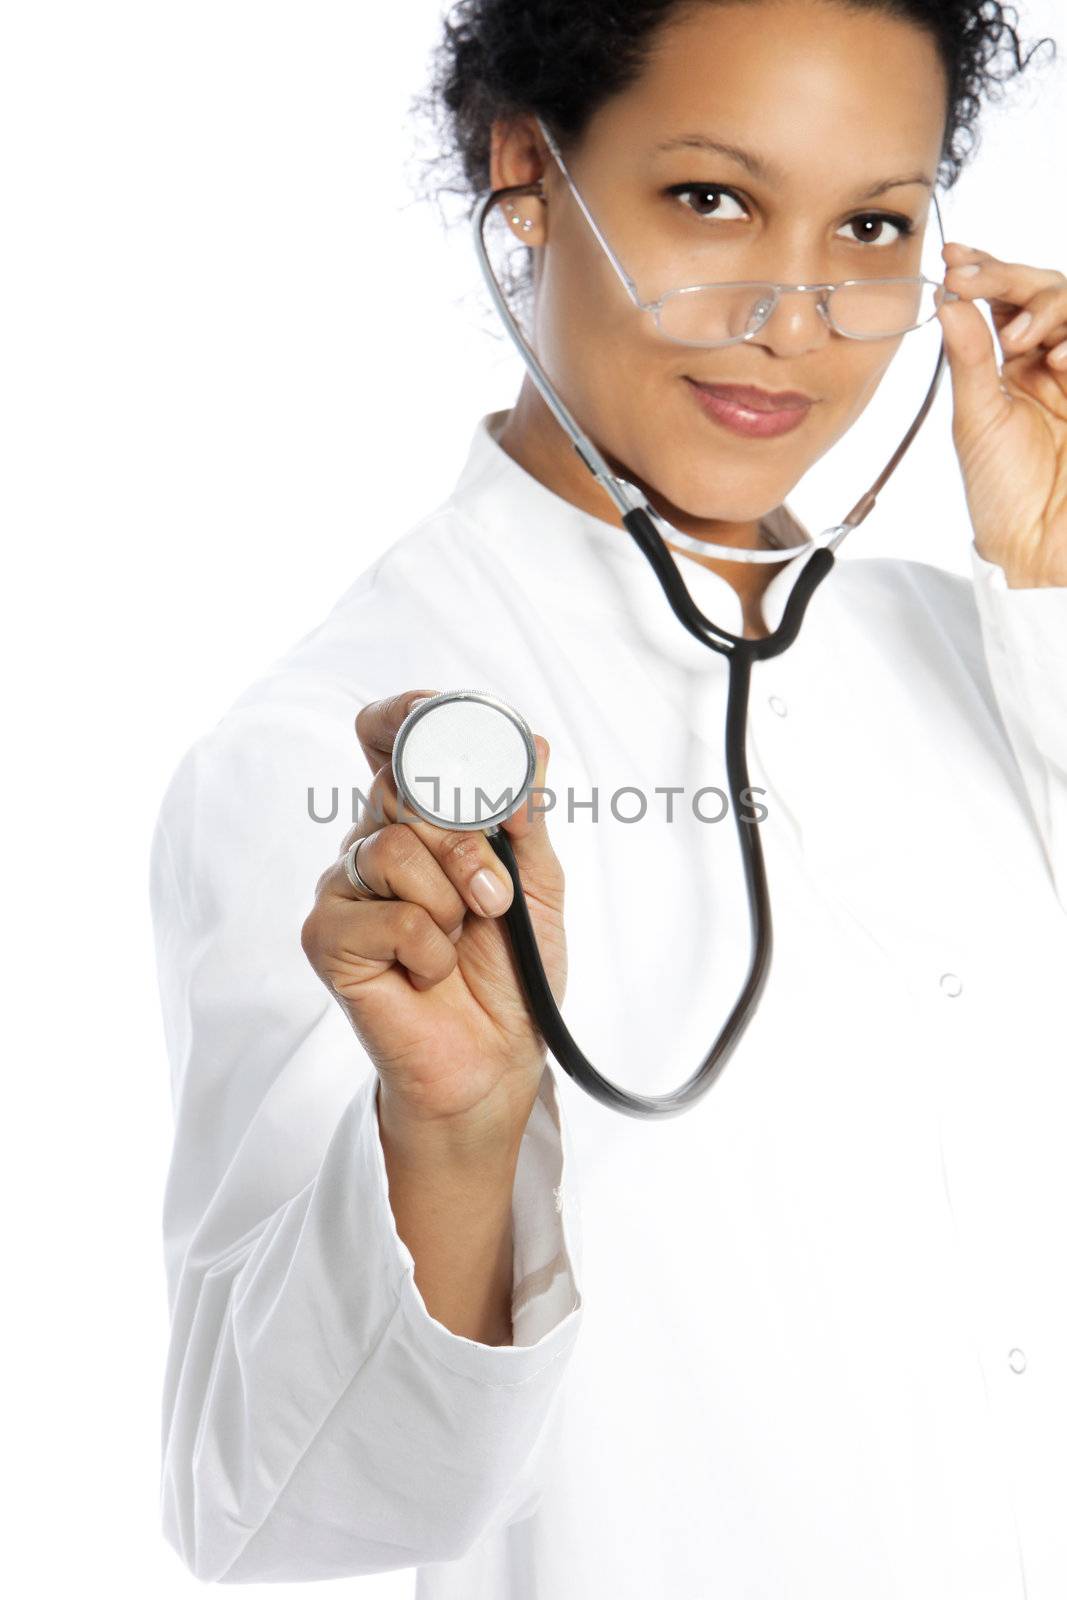 Attractive African American cardiologist or doctor wearing a stethoscope in her ears holding out the disc towards the camera as though listening